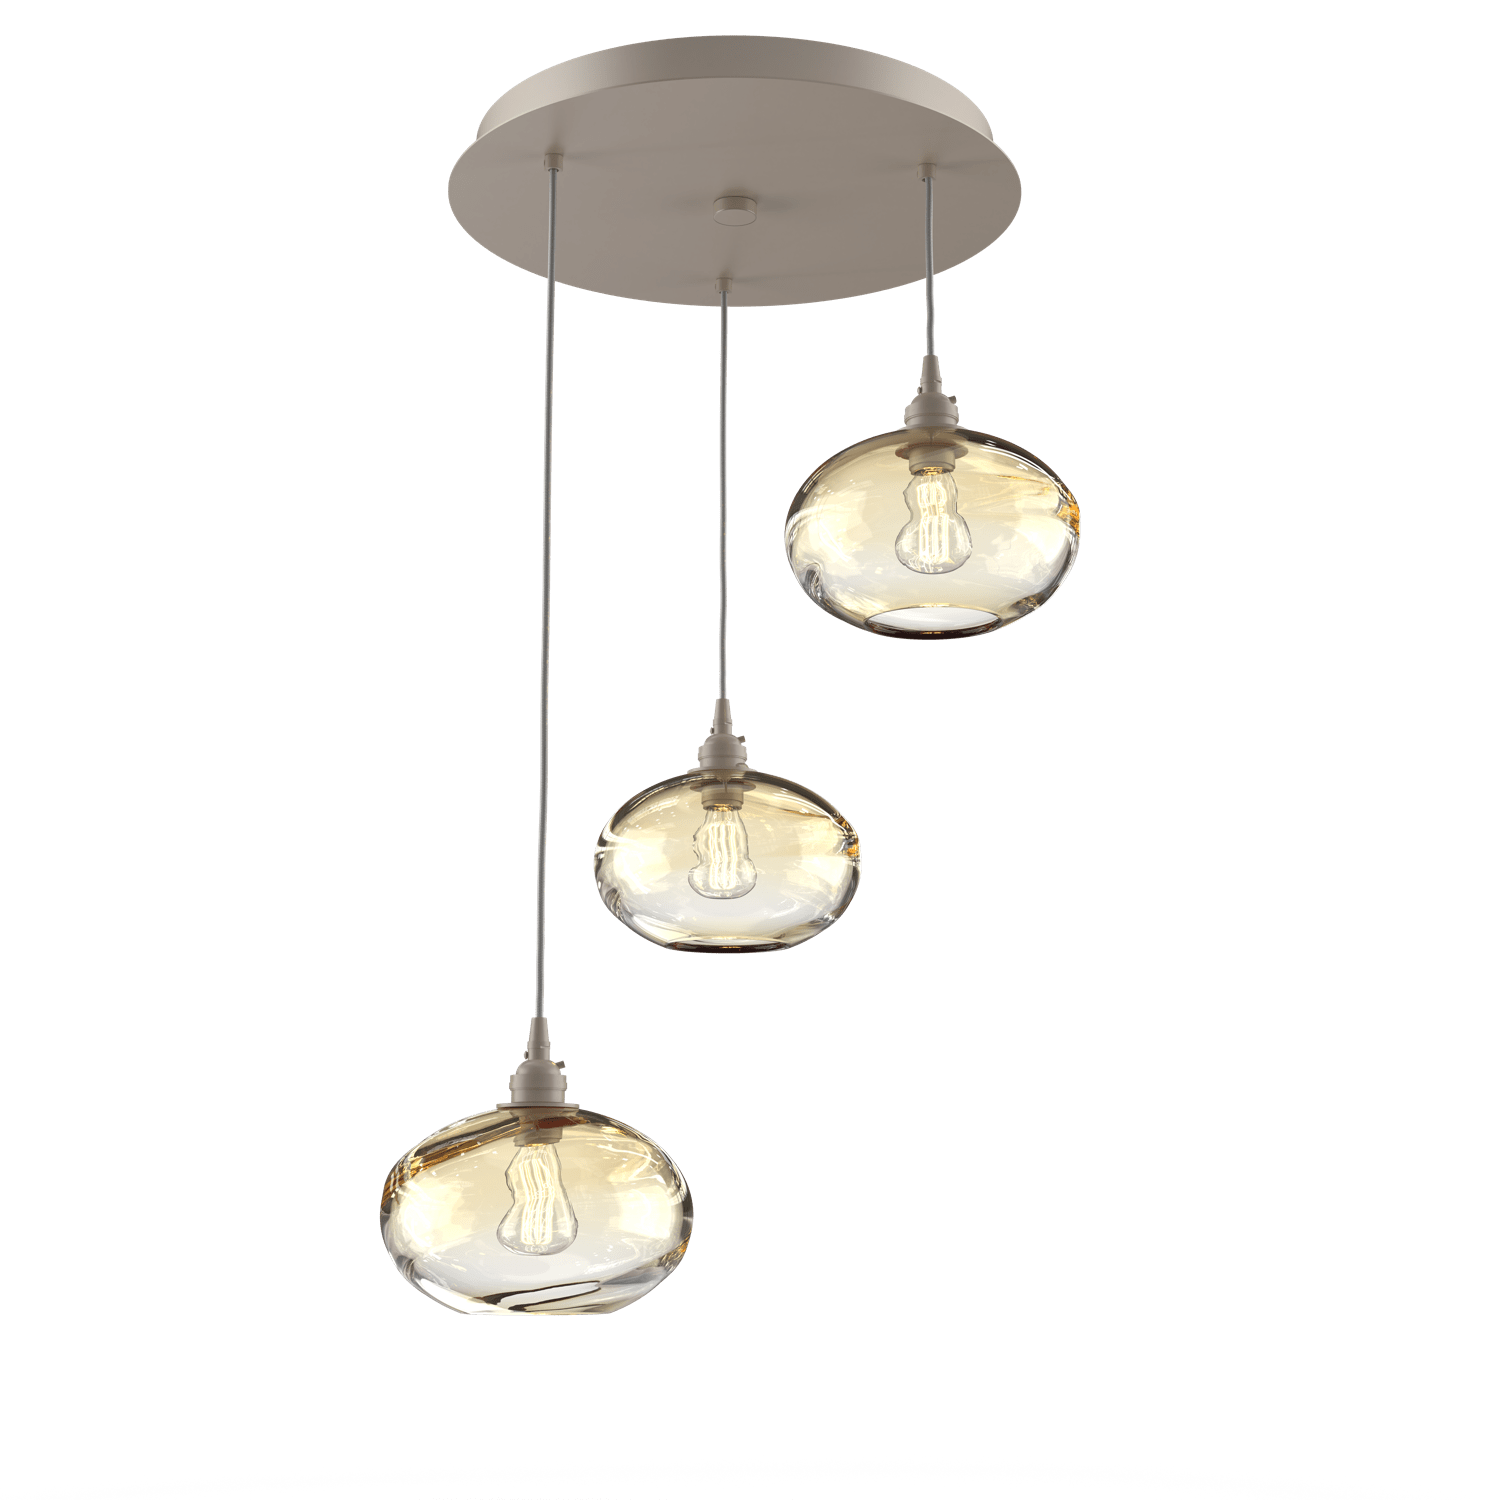 CHB0036-03-BS-OA-Hammerton-Studio-Optic-Blown-Glass-Coppa-3-light-round-pendant-chandelier-with-metallic-beige-silver-finish-and-optic-amber-blown-glass-shades-and-incandescent-lamping